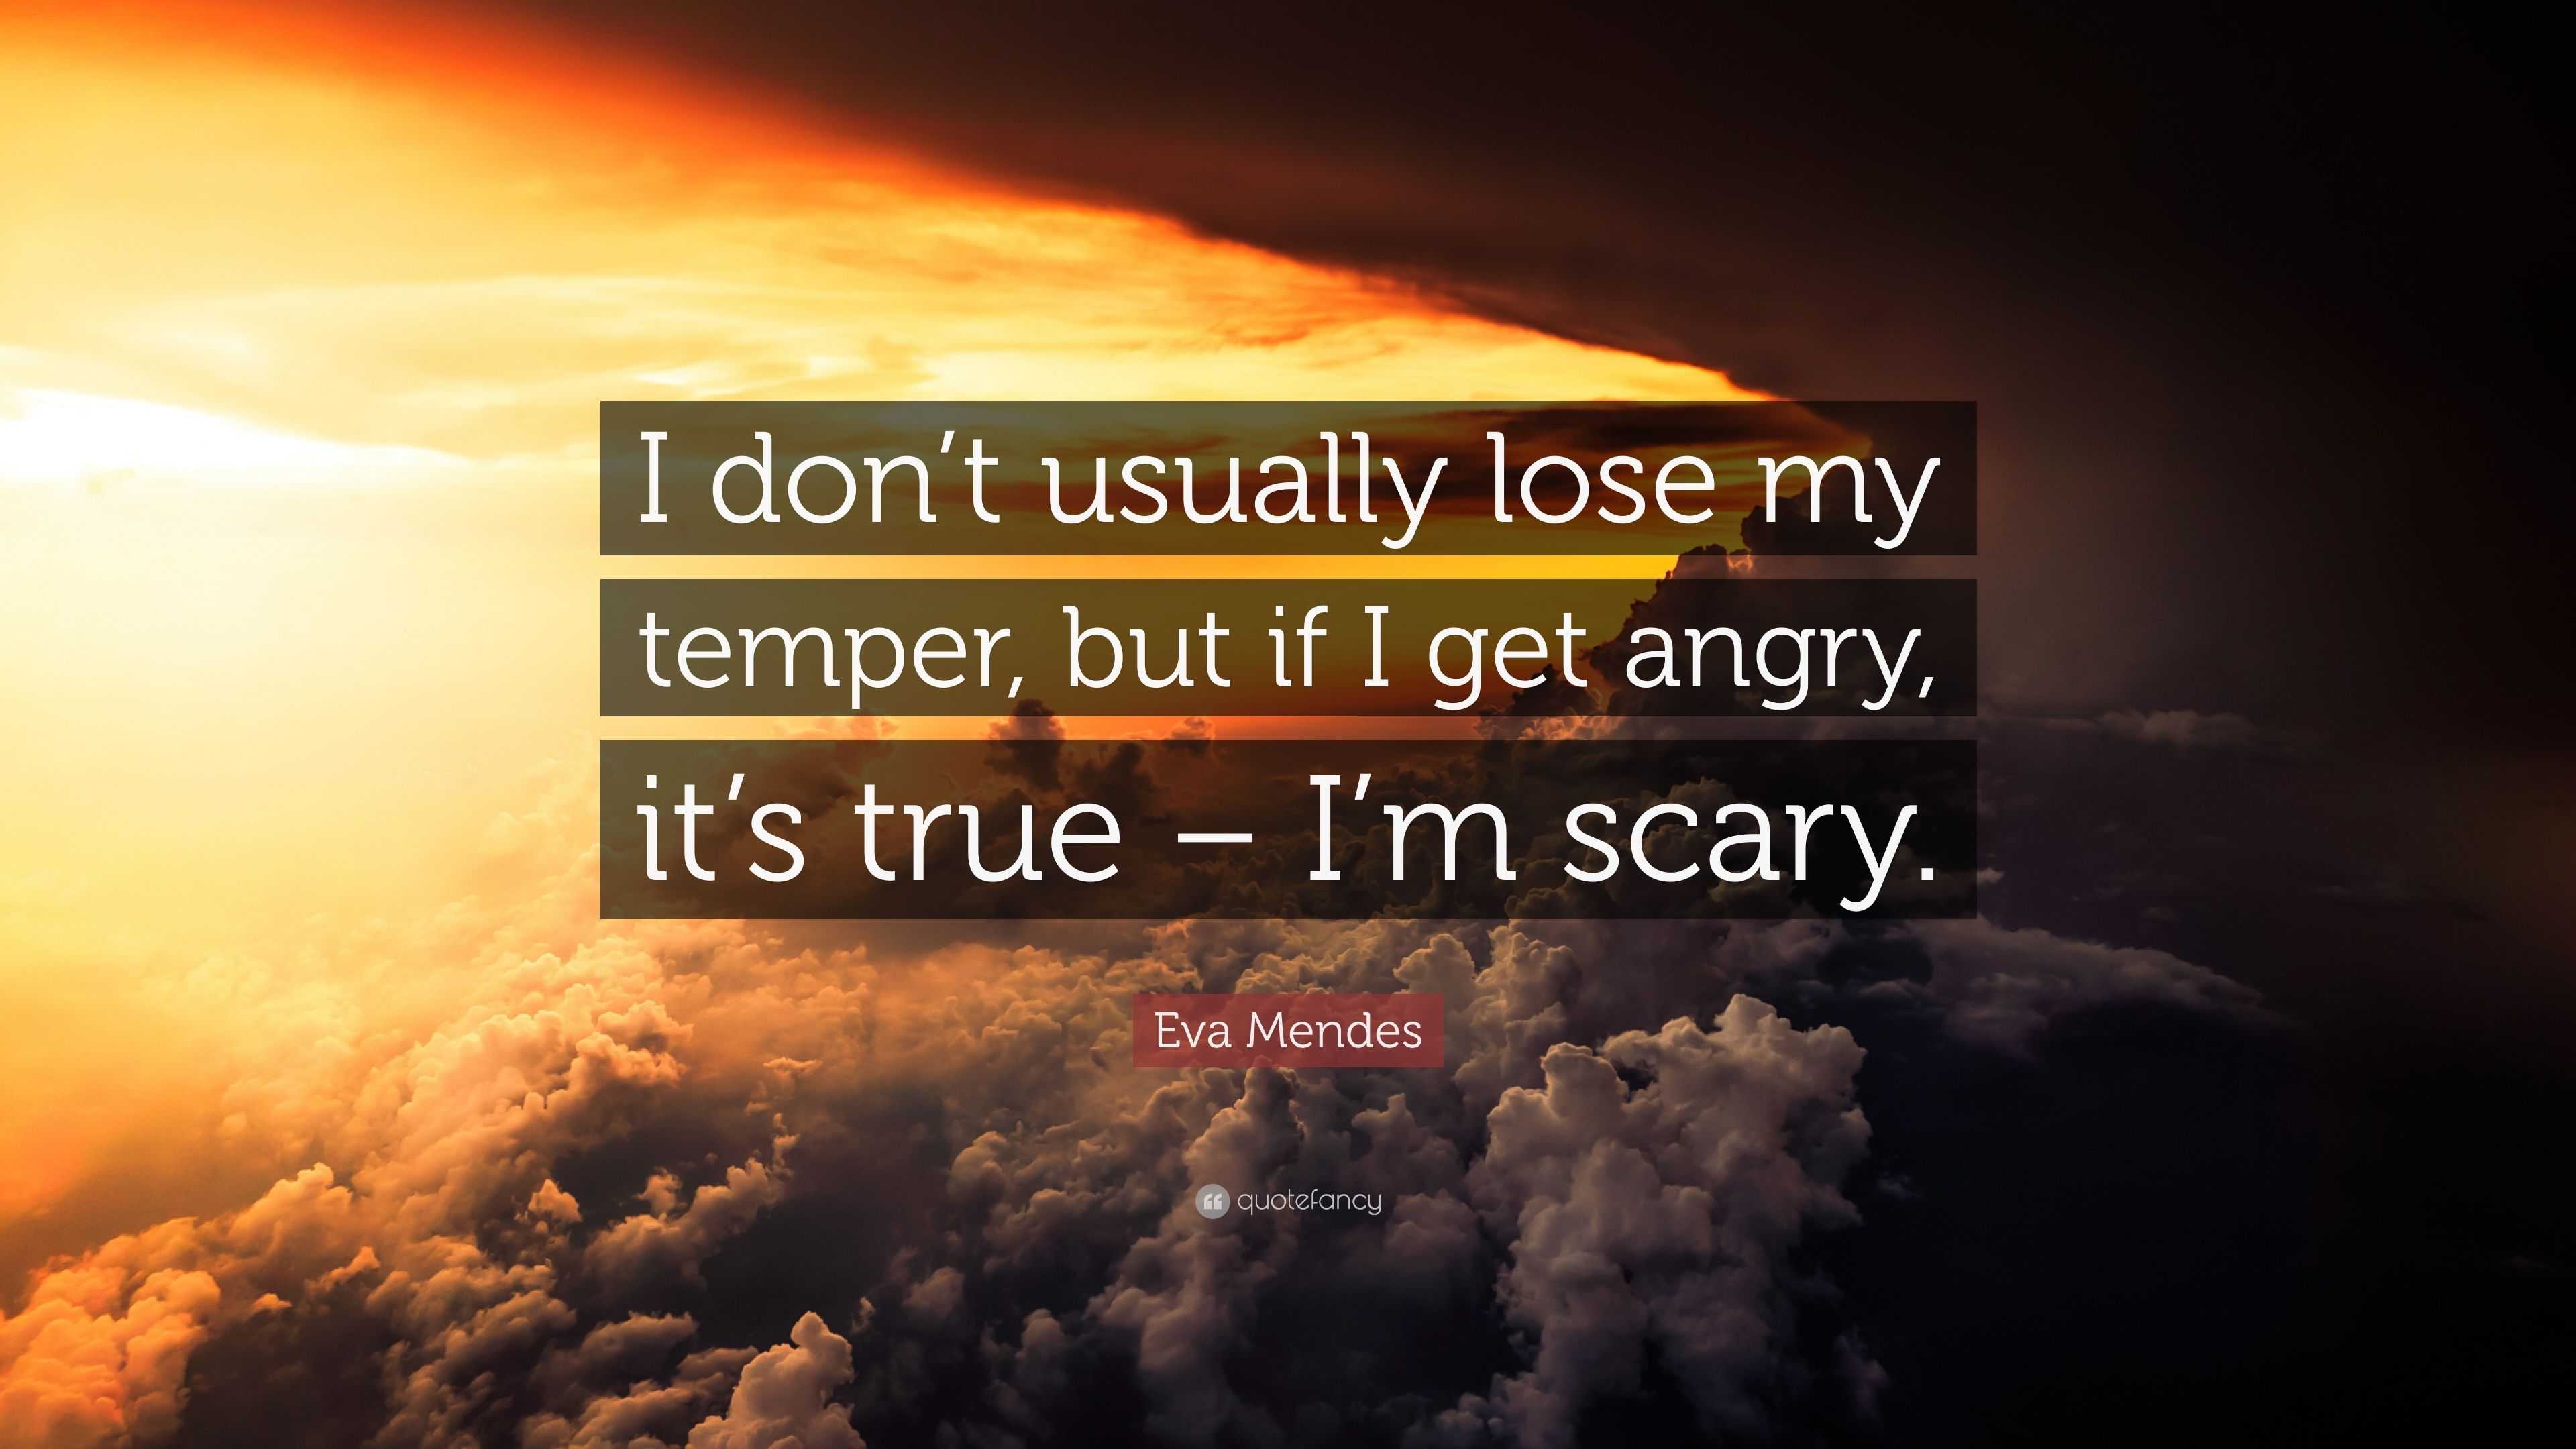 Eva Mendes Quote “i Dont Usually Lose My Temper But If I Get Angry Its True Im Scary”